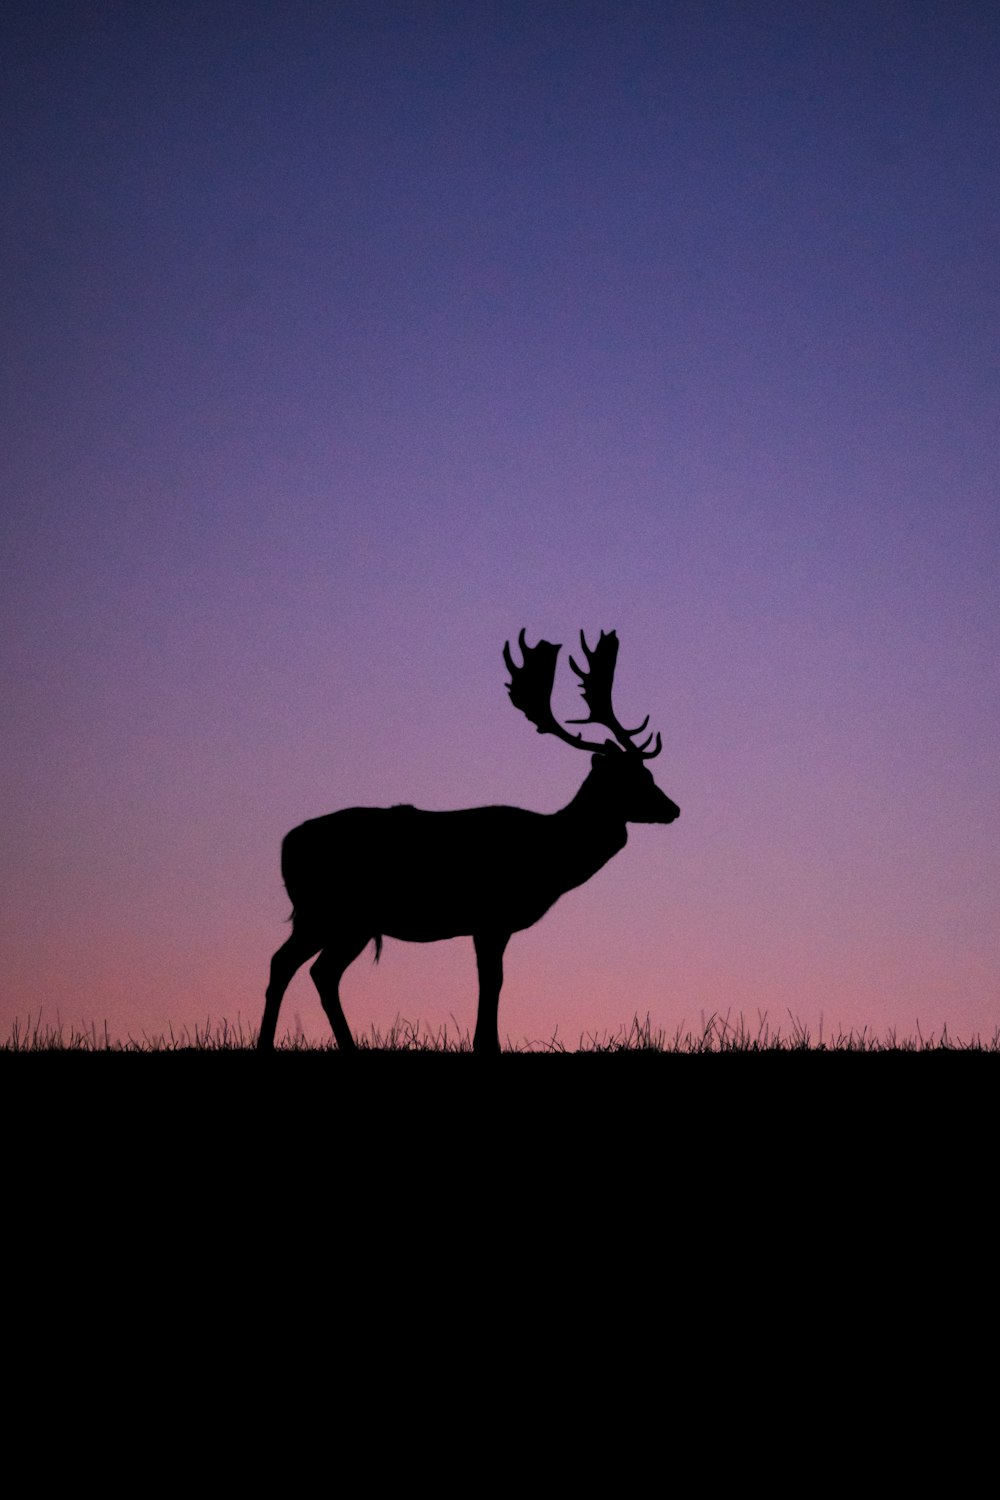 Silhouette of deer on grass field during sunset photo – Free Animal Image  on Unsplash